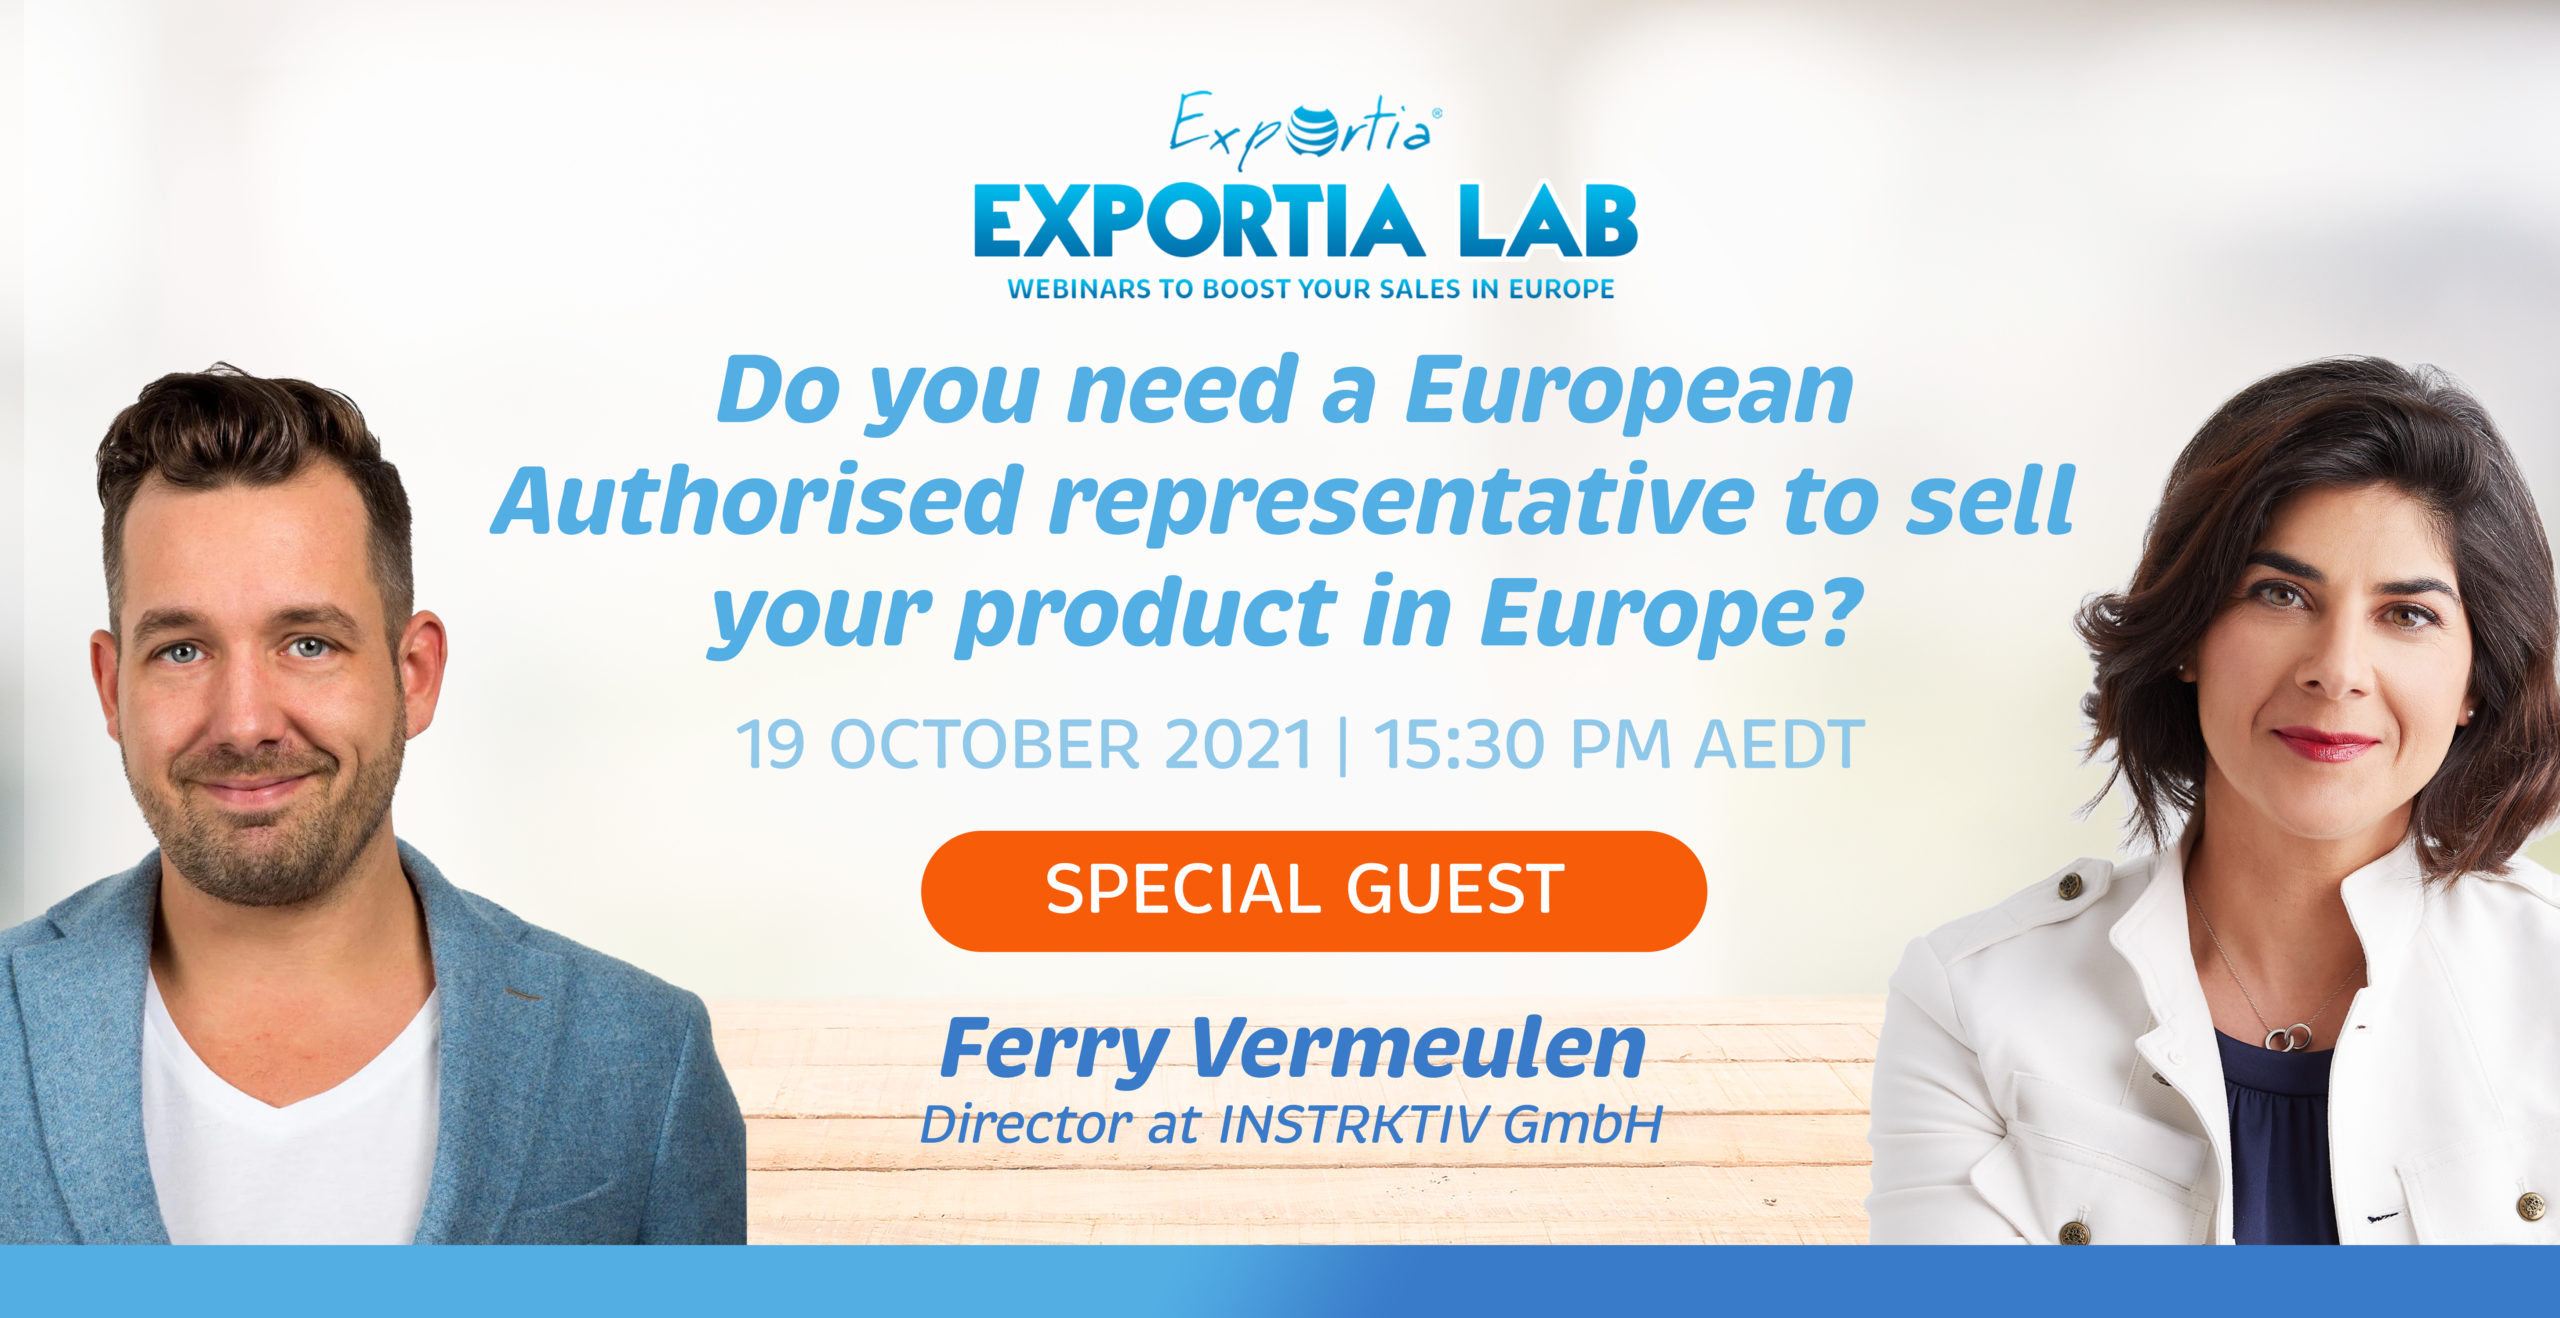 Want to find out if you need a European authorised representative to sell your product in Europe?